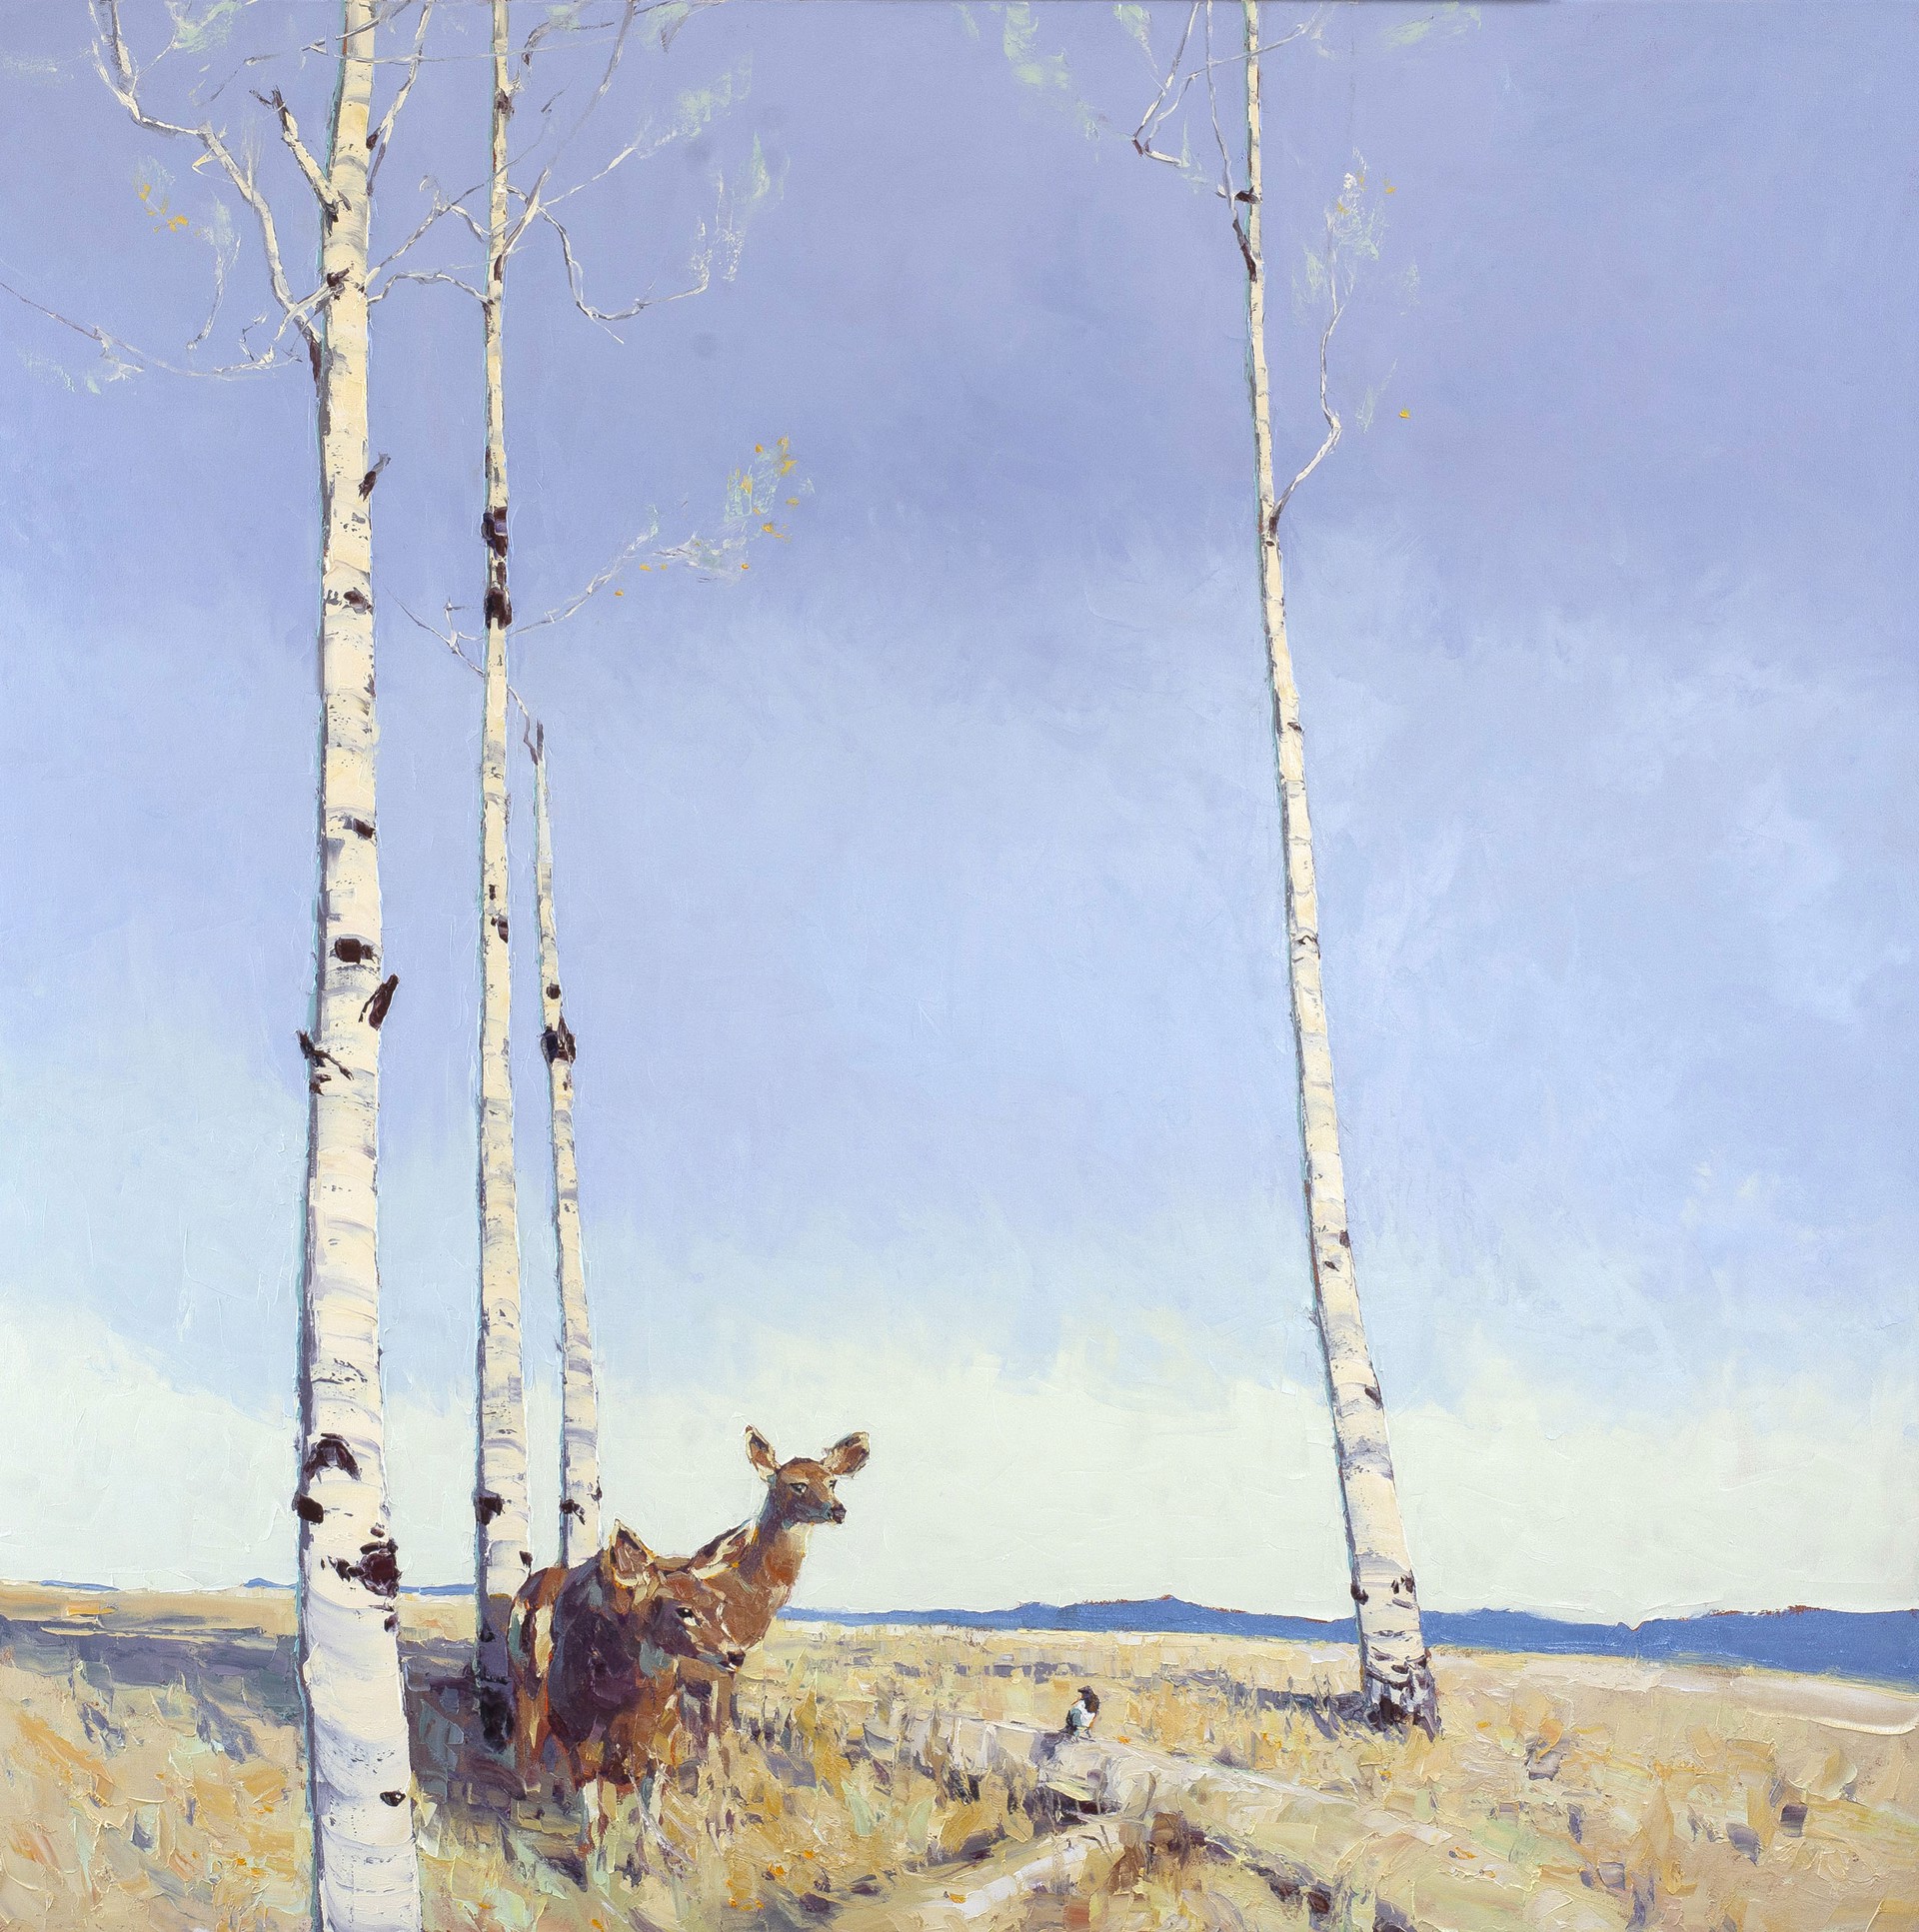 Original Oil Landscape Painting Featuring Aspen Trees And Two Deer With Mountains In The Distance